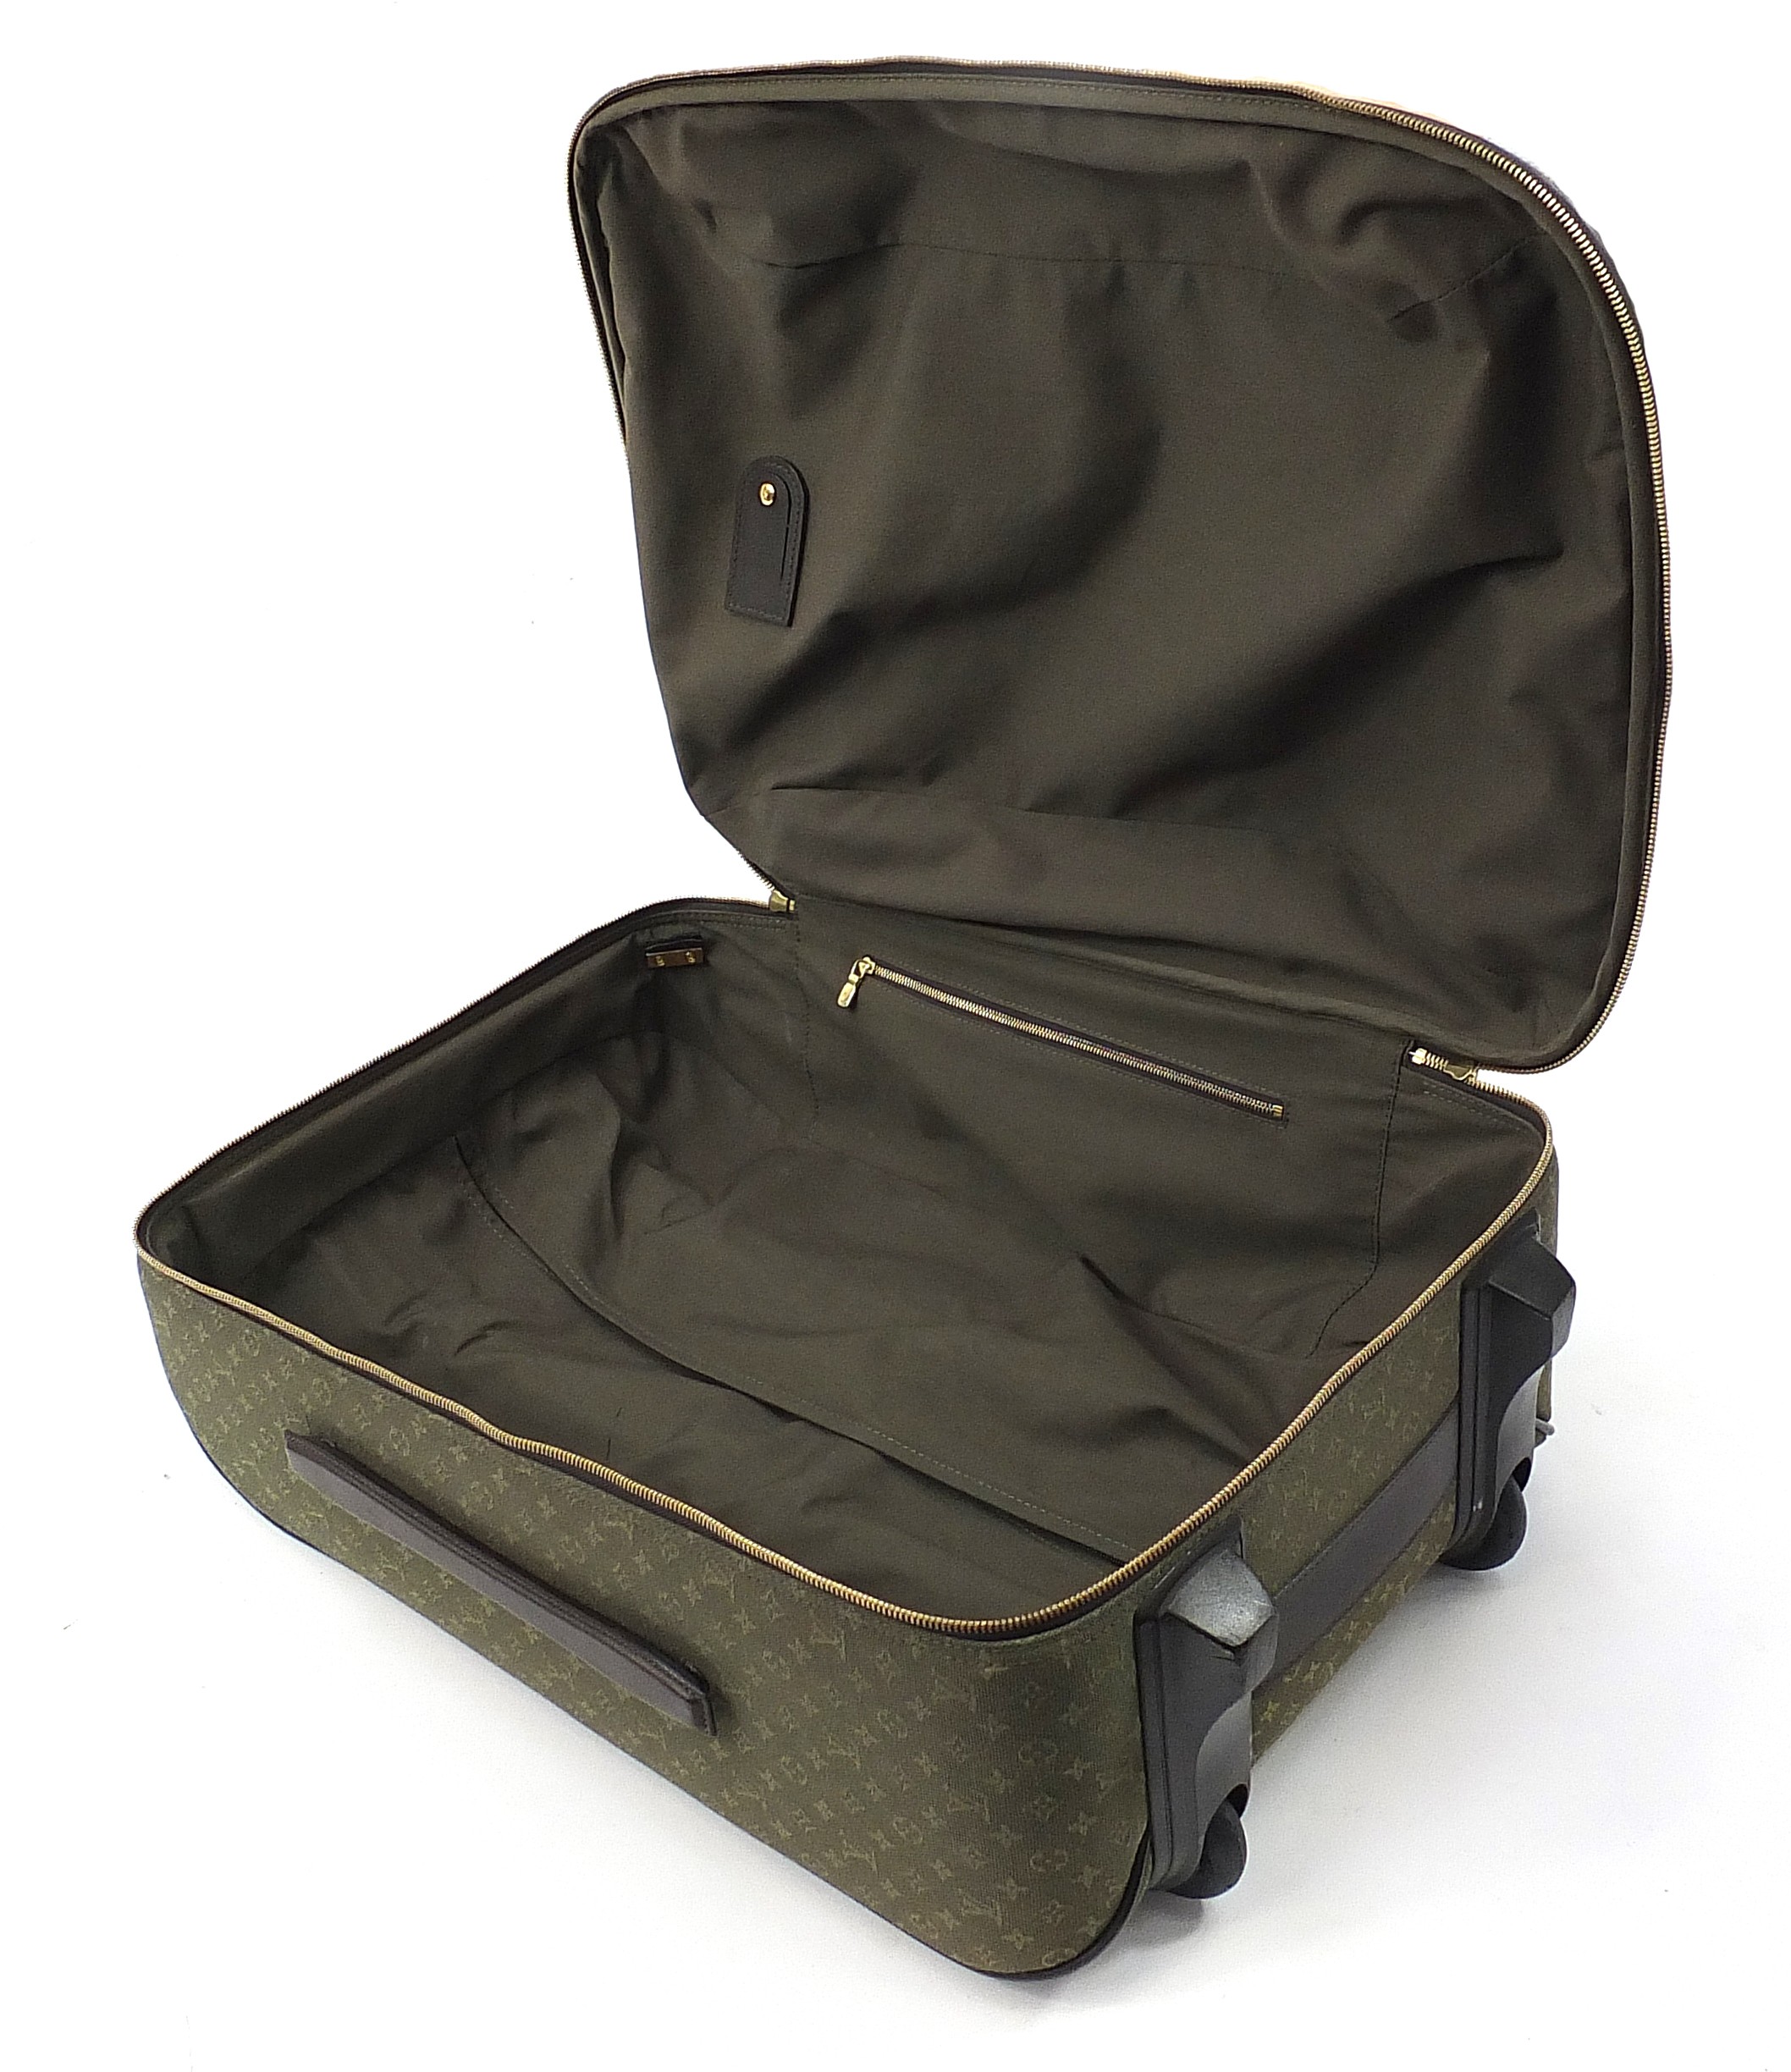 Louis Vuitton Pegase green monogrammed canvas trolley travel suitcase, serial number SP0062, 57cm - Image 6 of 11